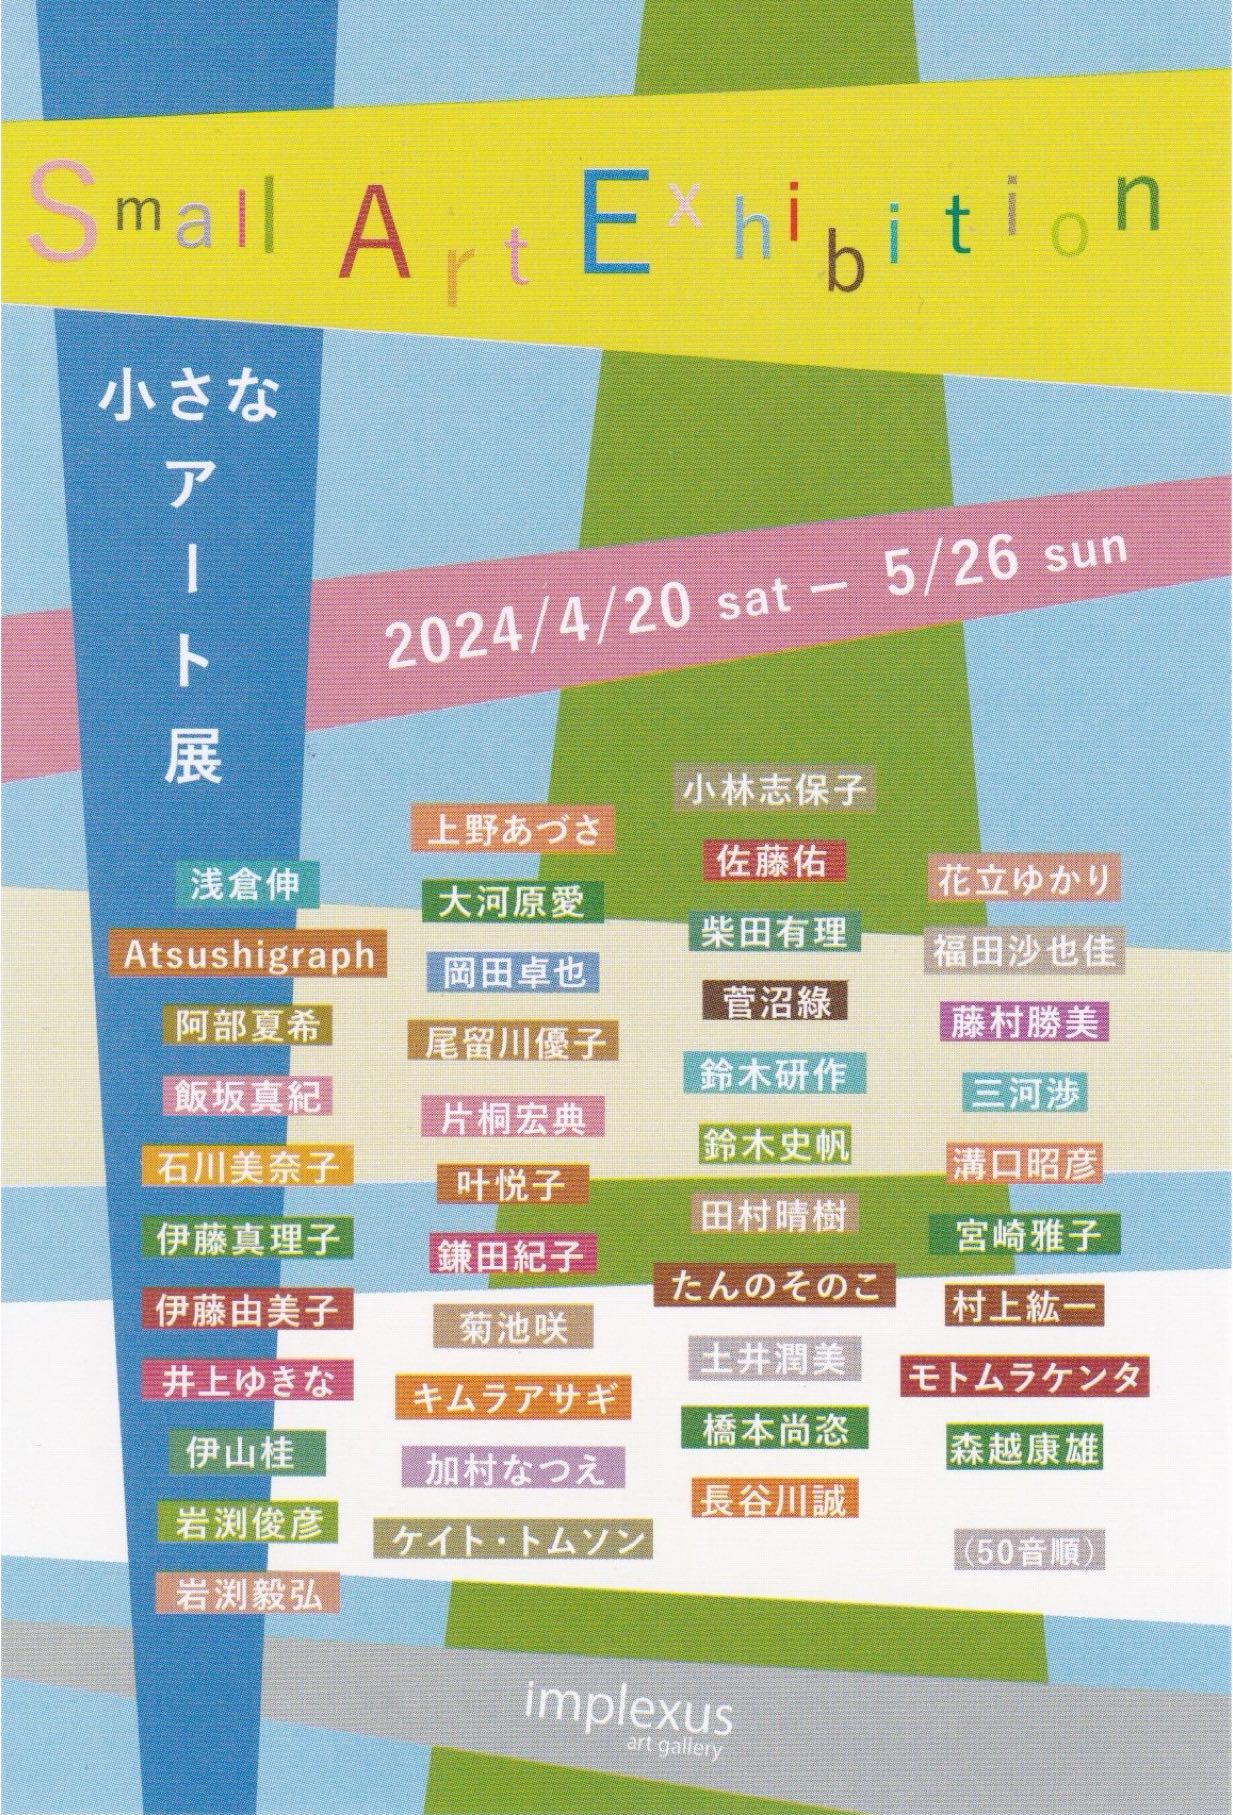 This is a flyer image of Implexus art gallery's group exhibition Small Art Exhibition.